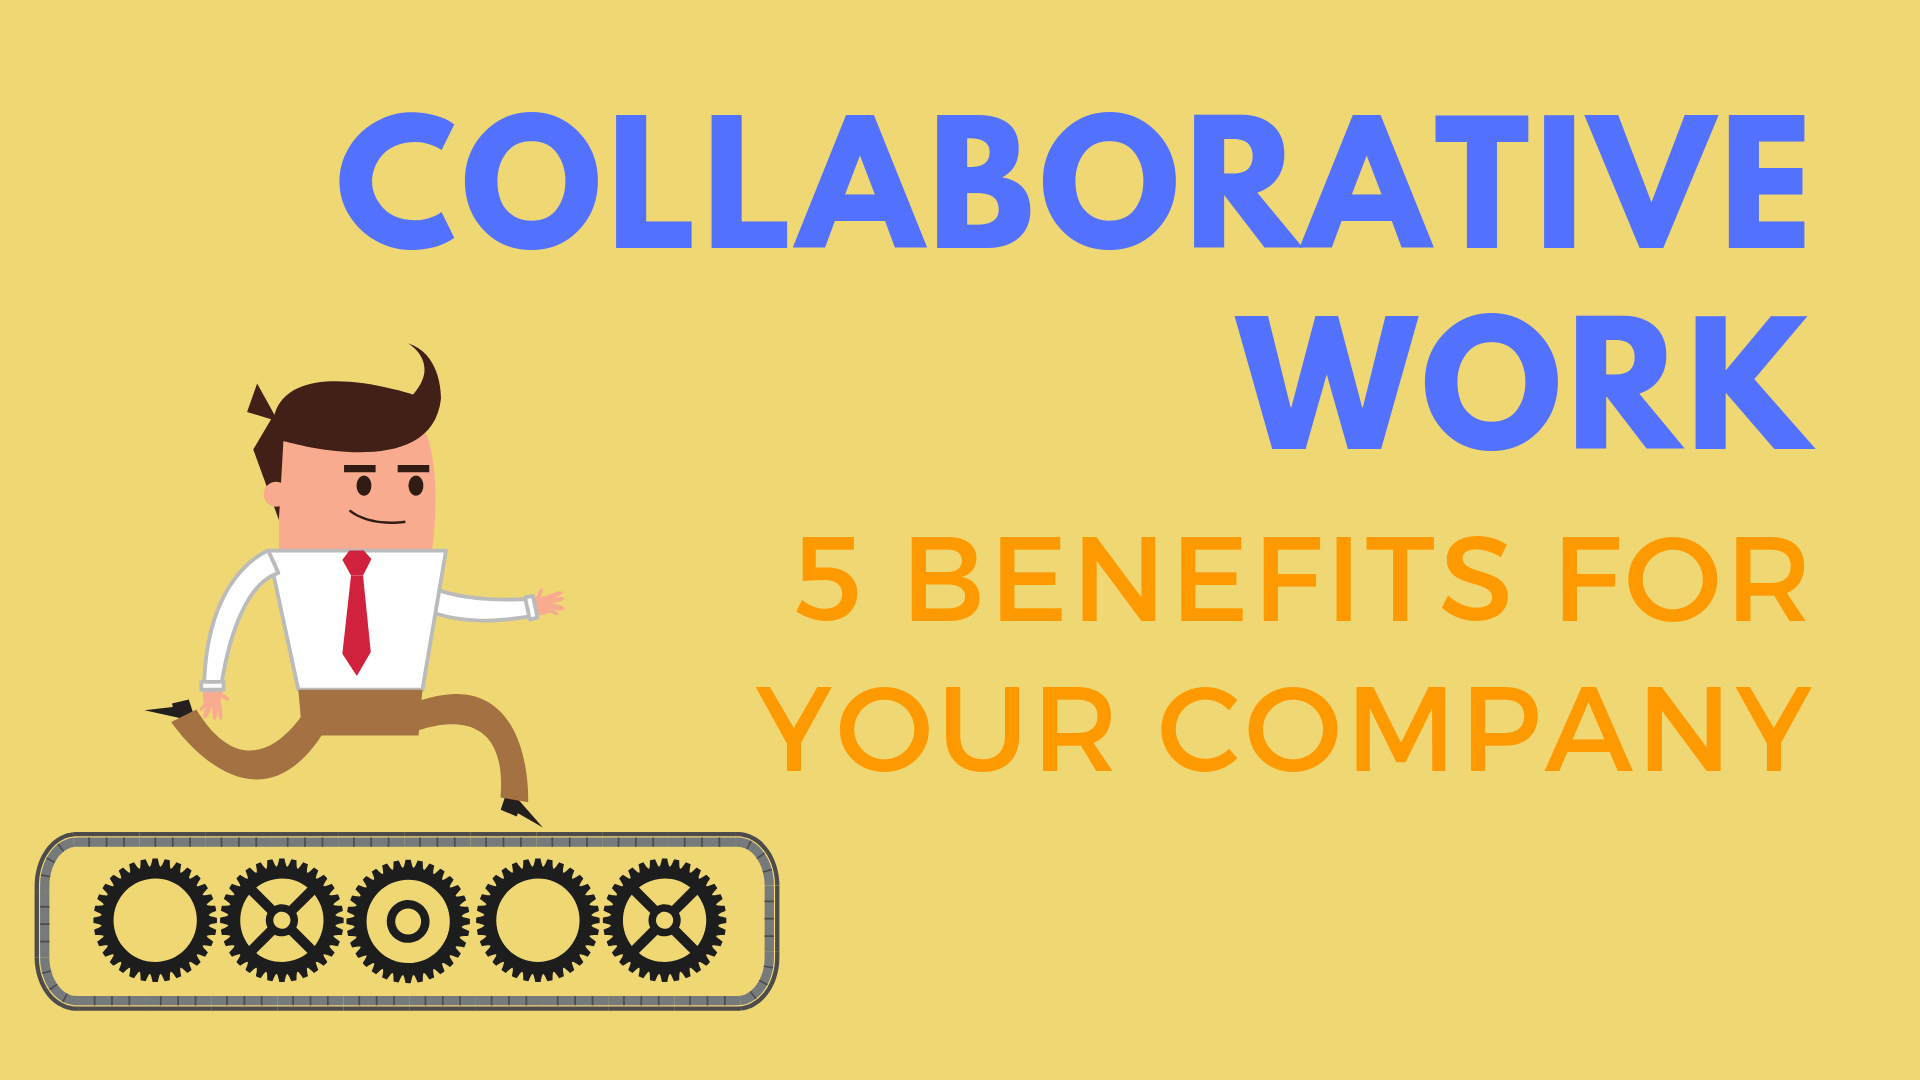 collaborative work - 5 benefits for your company